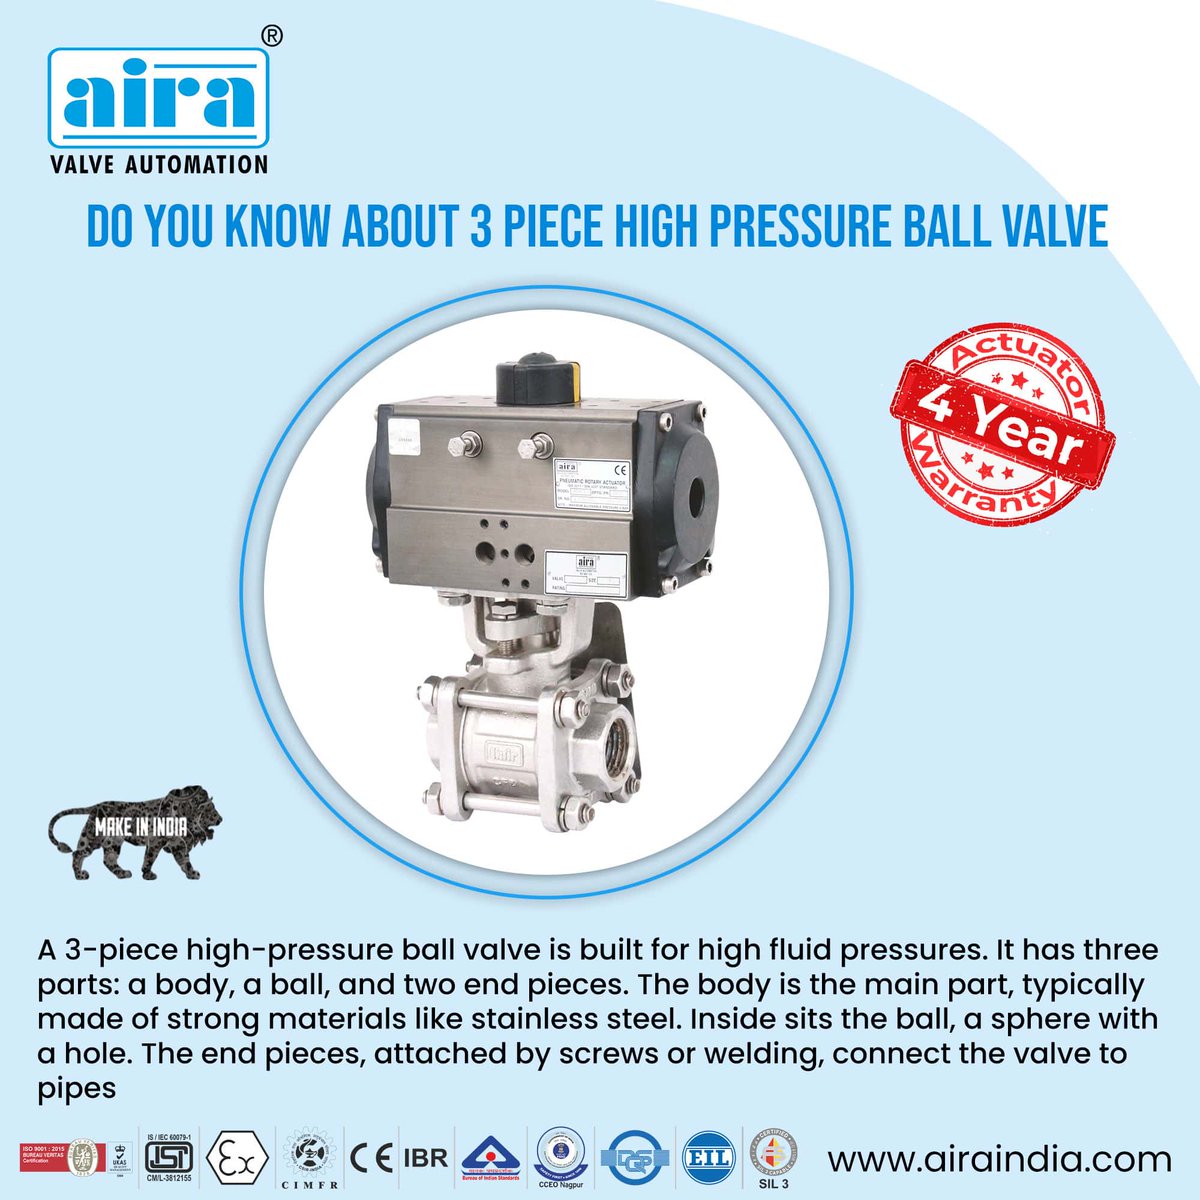 Meet the 3 Piece High Pressure Ball Valve! 💥 Strong, reliable, and built to handle extreme conditions comfortably. Perfect for oil, gas, and more.

#AiraEuro #HighPressureBallValve #BallValve #Trending #TrendingNow #Manufacturer #Exporter #Oem #MakeInIndia #G20 #India